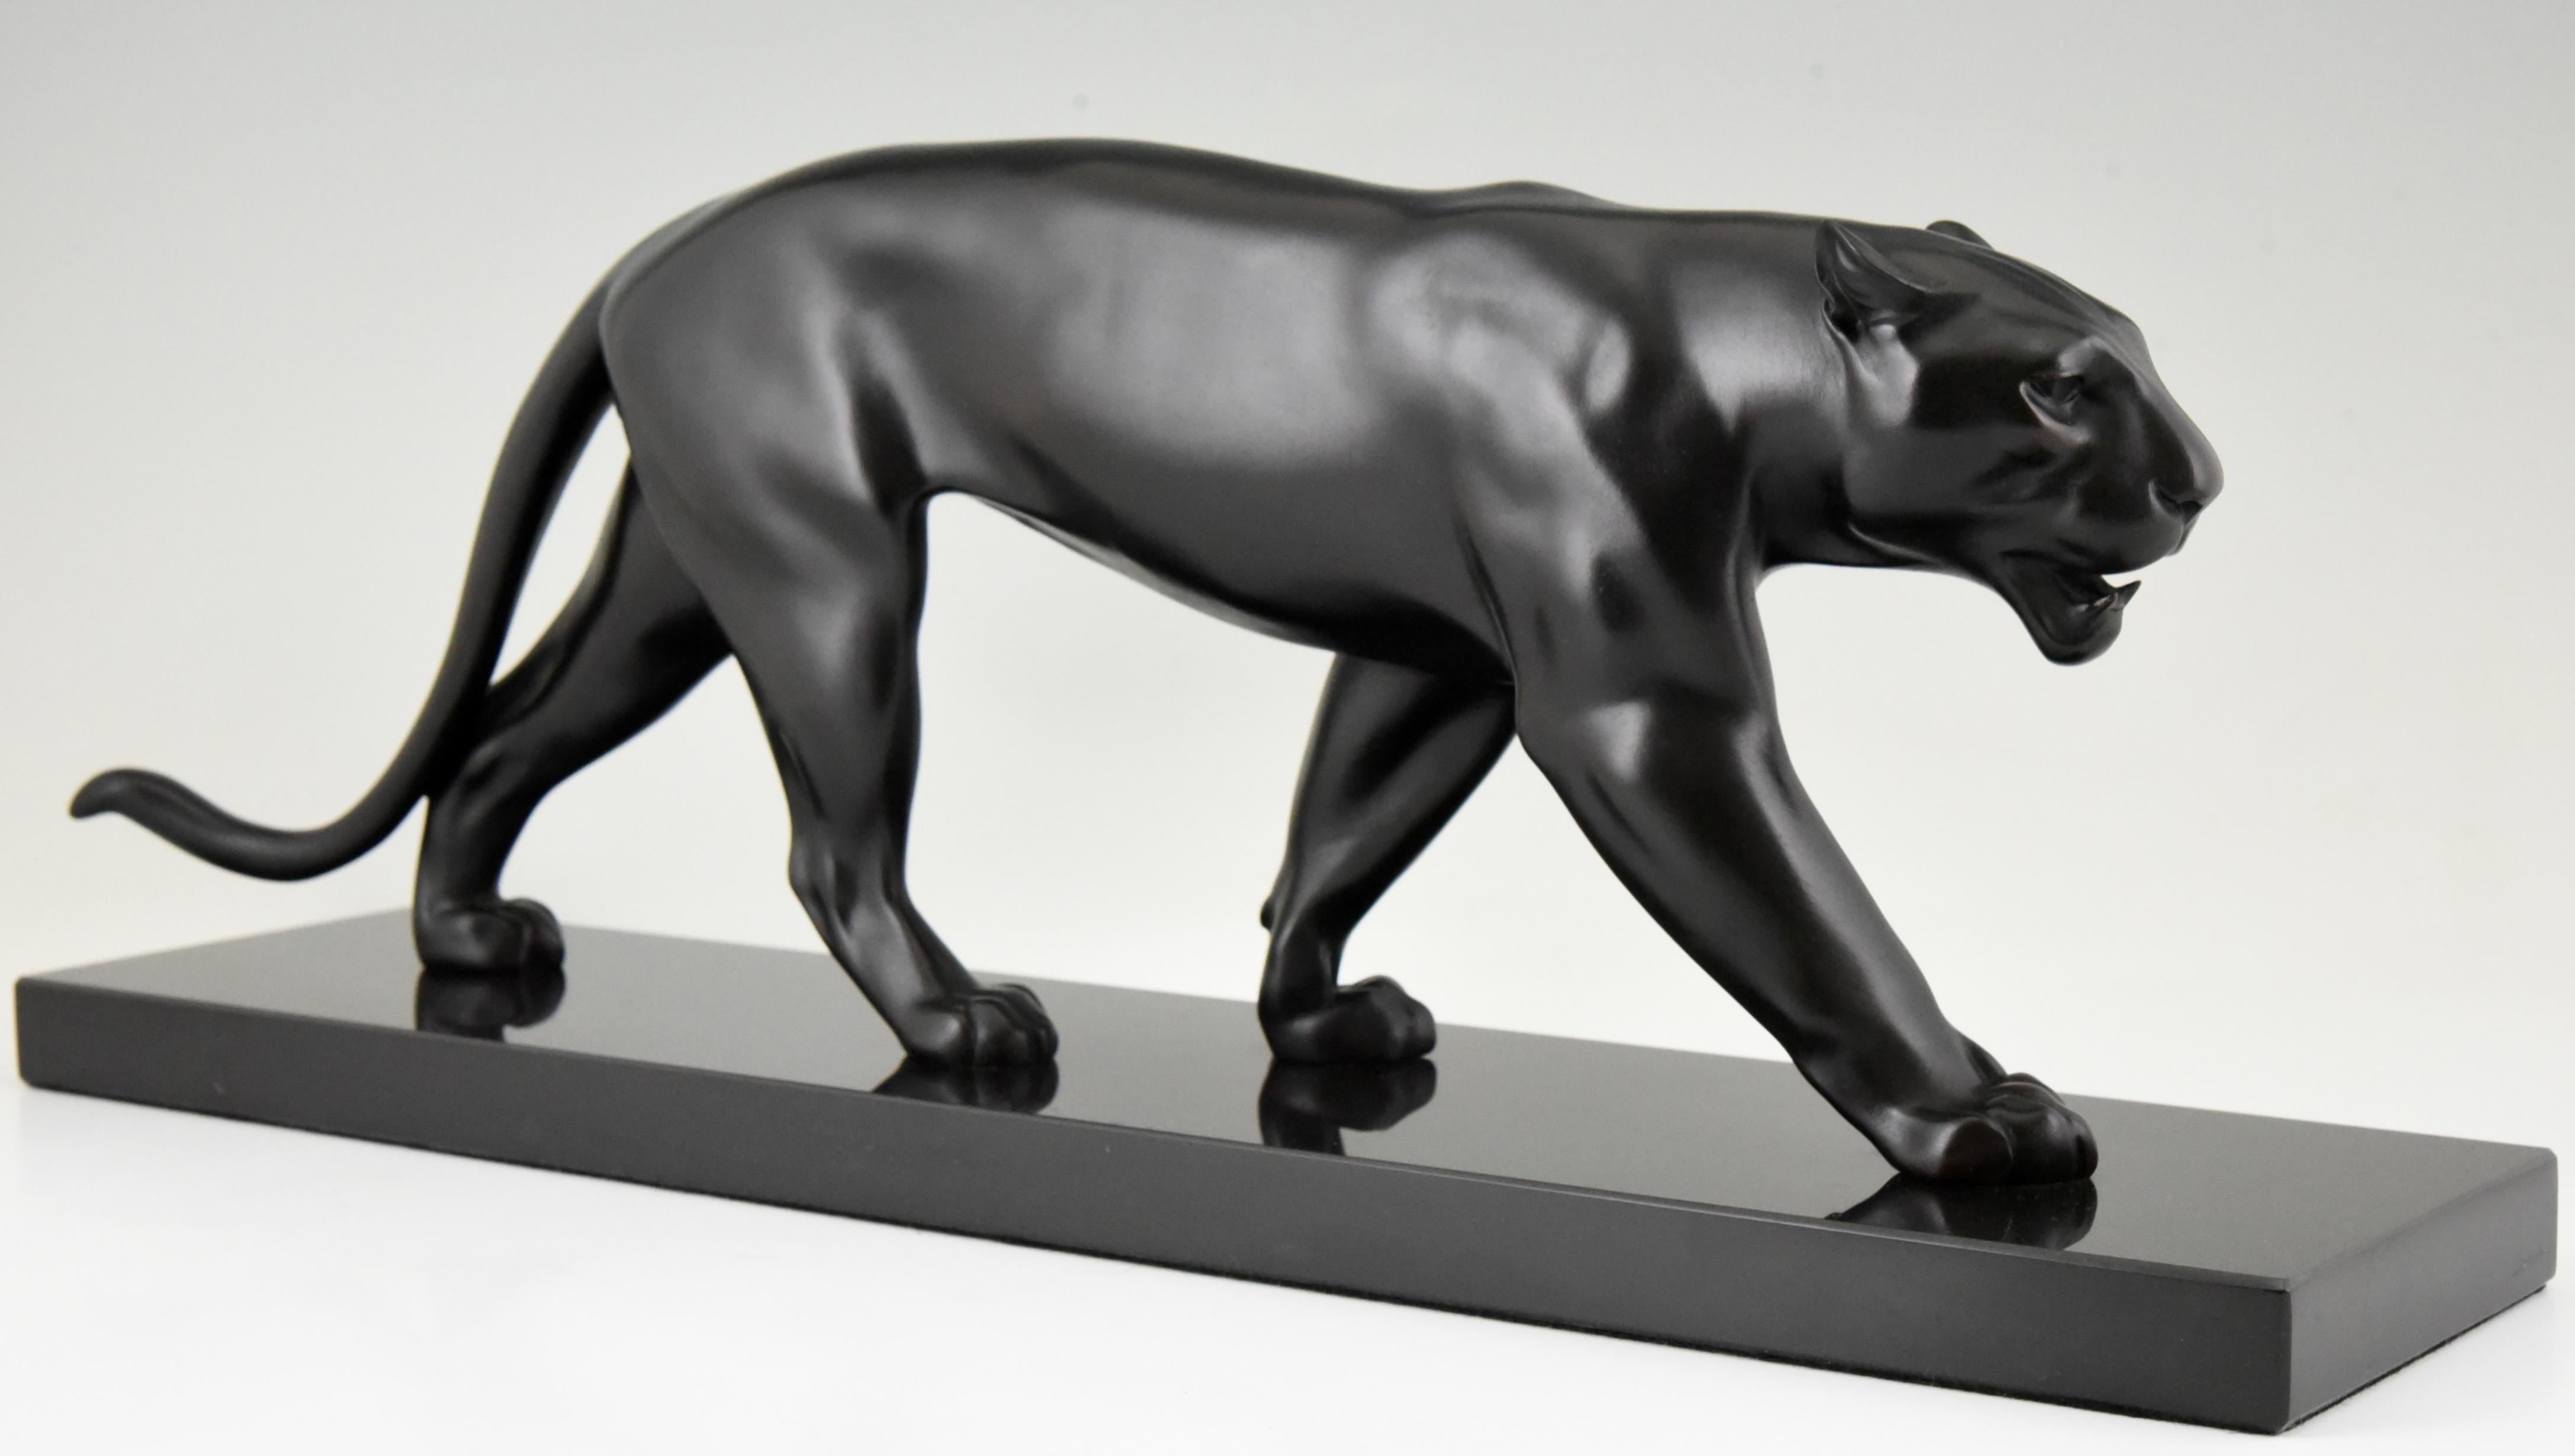 French Art Deco panther sculpture Baghera by Max Le Verrier, France